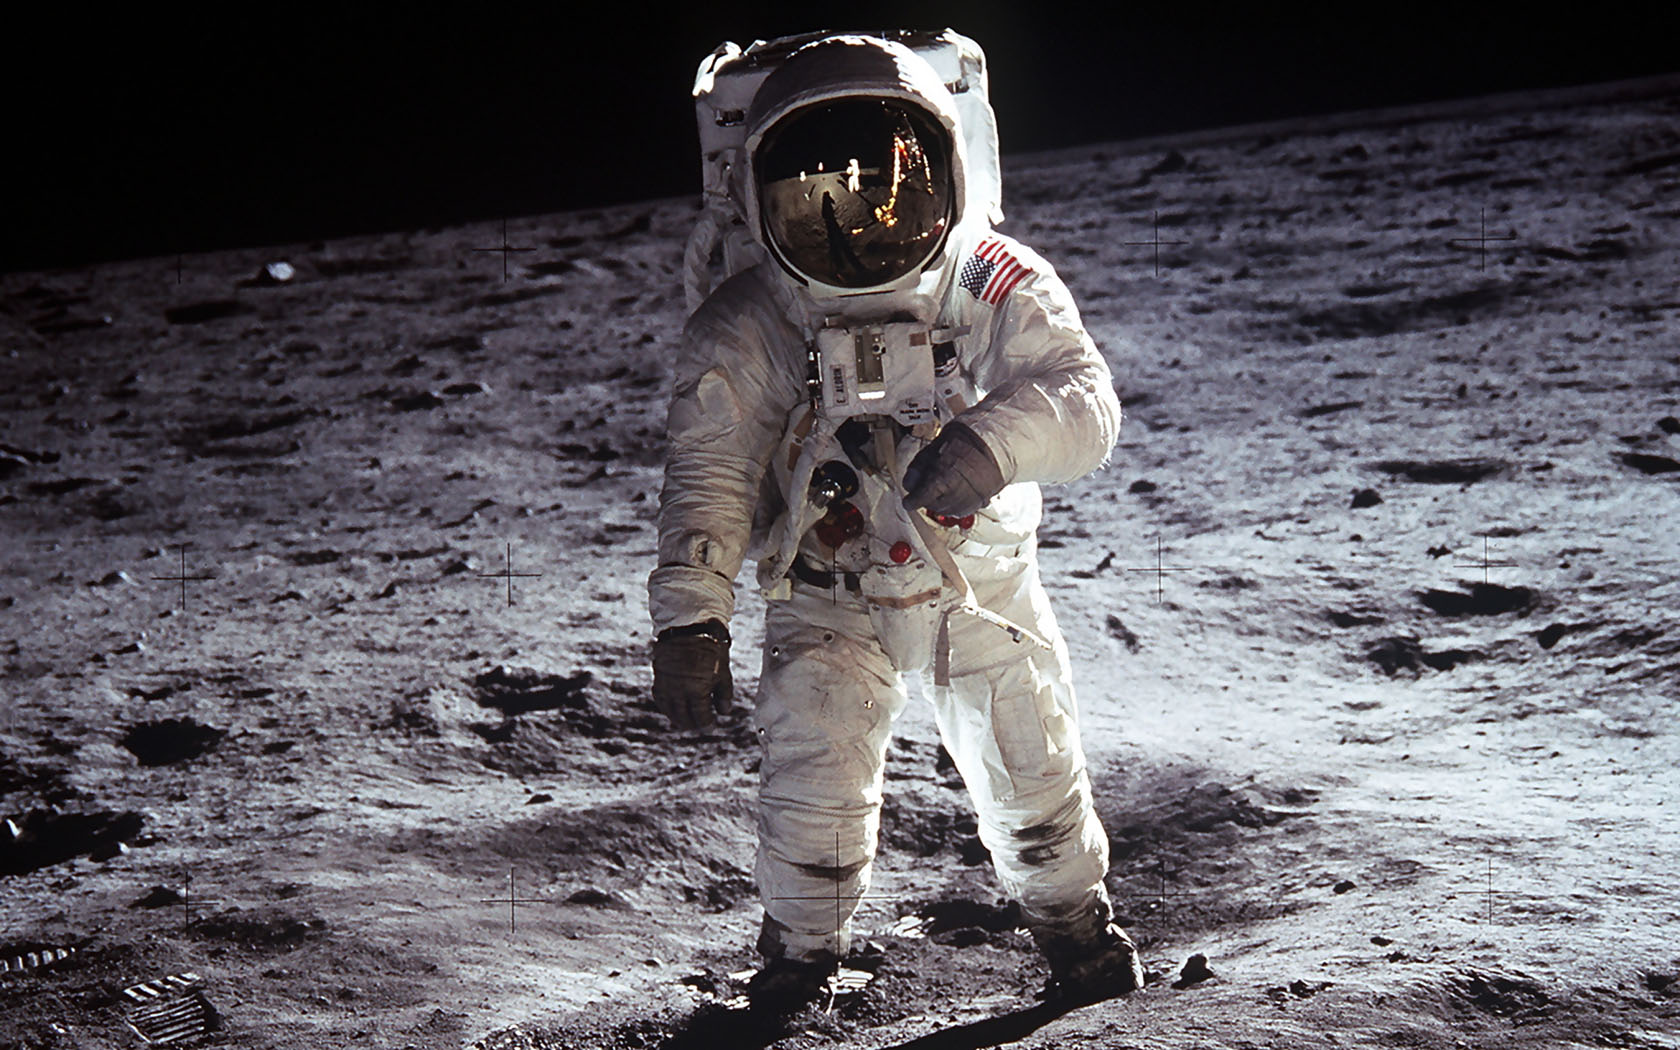 astronaut wearing spacesuit with U.S. flag walks on the moon